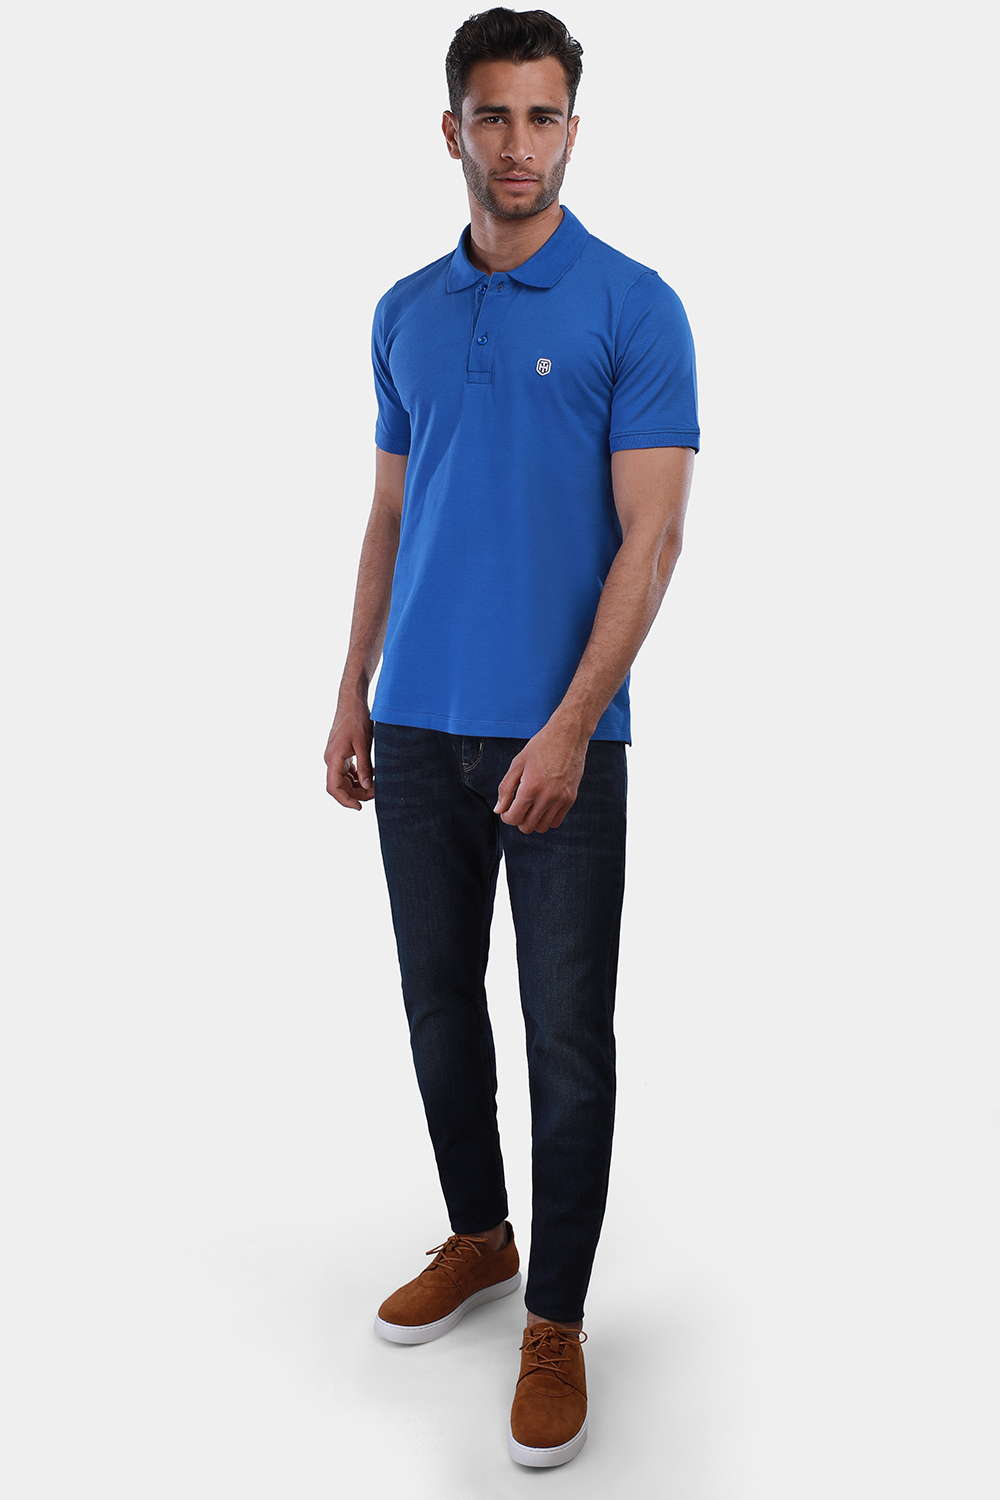 Polo Shirt New Fit Blue - TIE HOUSE